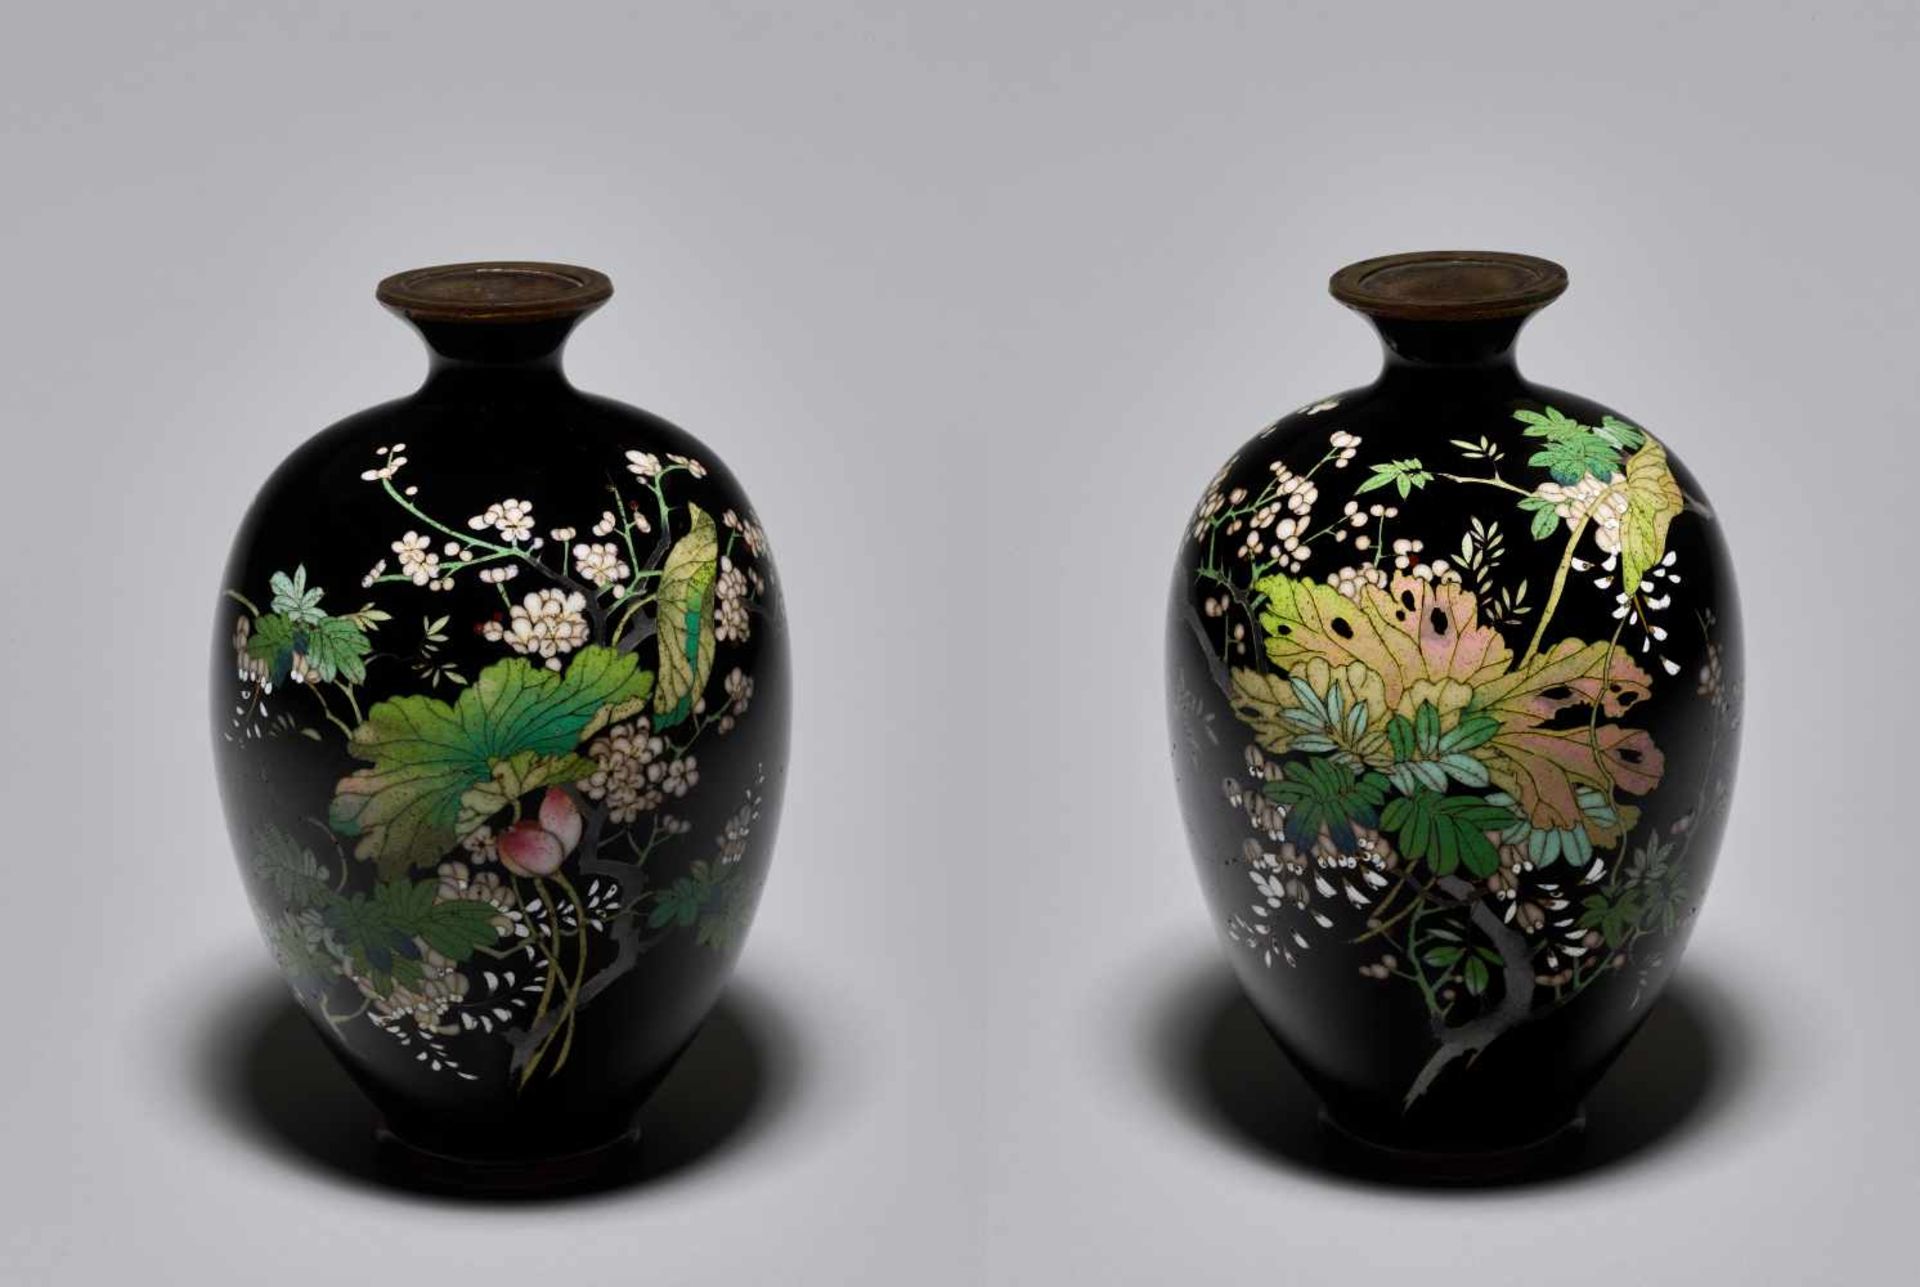 A PAIR OF SMALL CLOISONNÉ VASES Japan, Meiji period (1868-1912). Both vases have ovoid shapes and